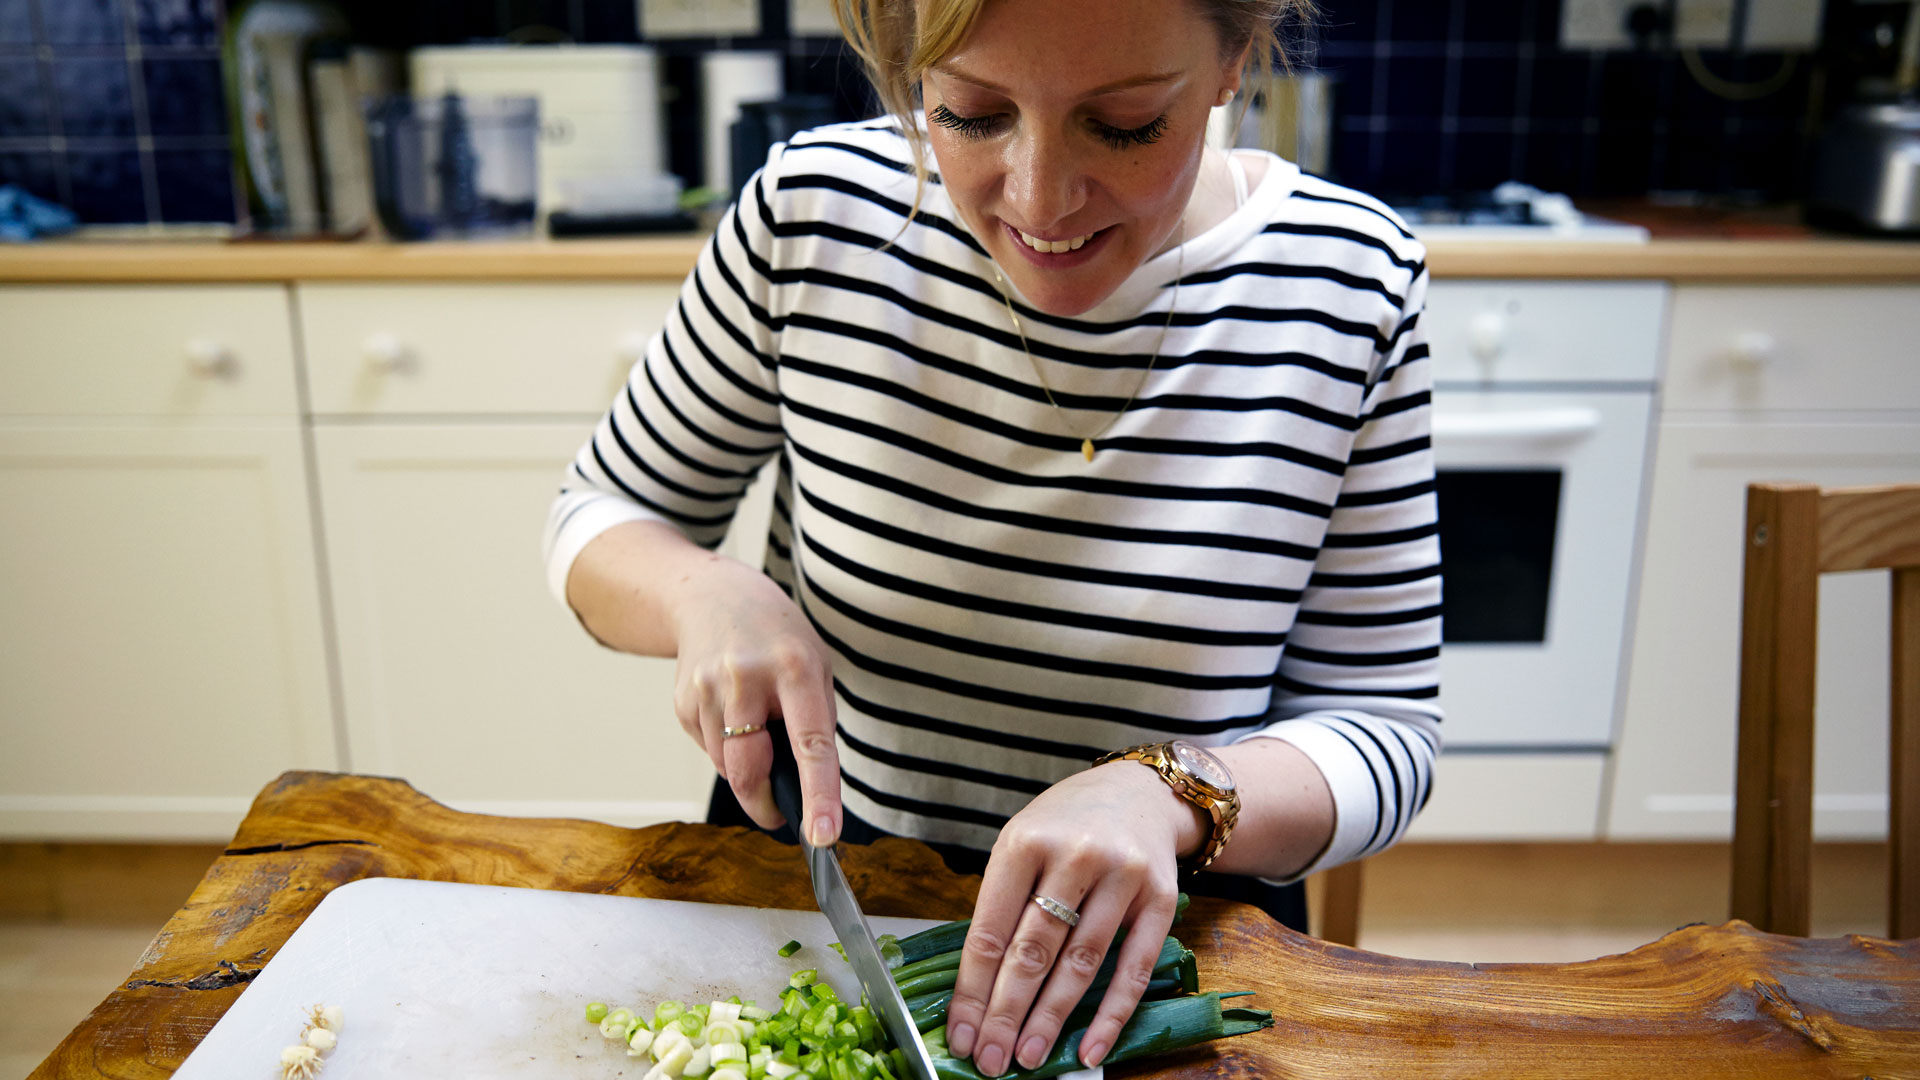 Karen Arkell chopping spring onions for her Tuna Burgers with Mustard Beetroot Salad recipe.